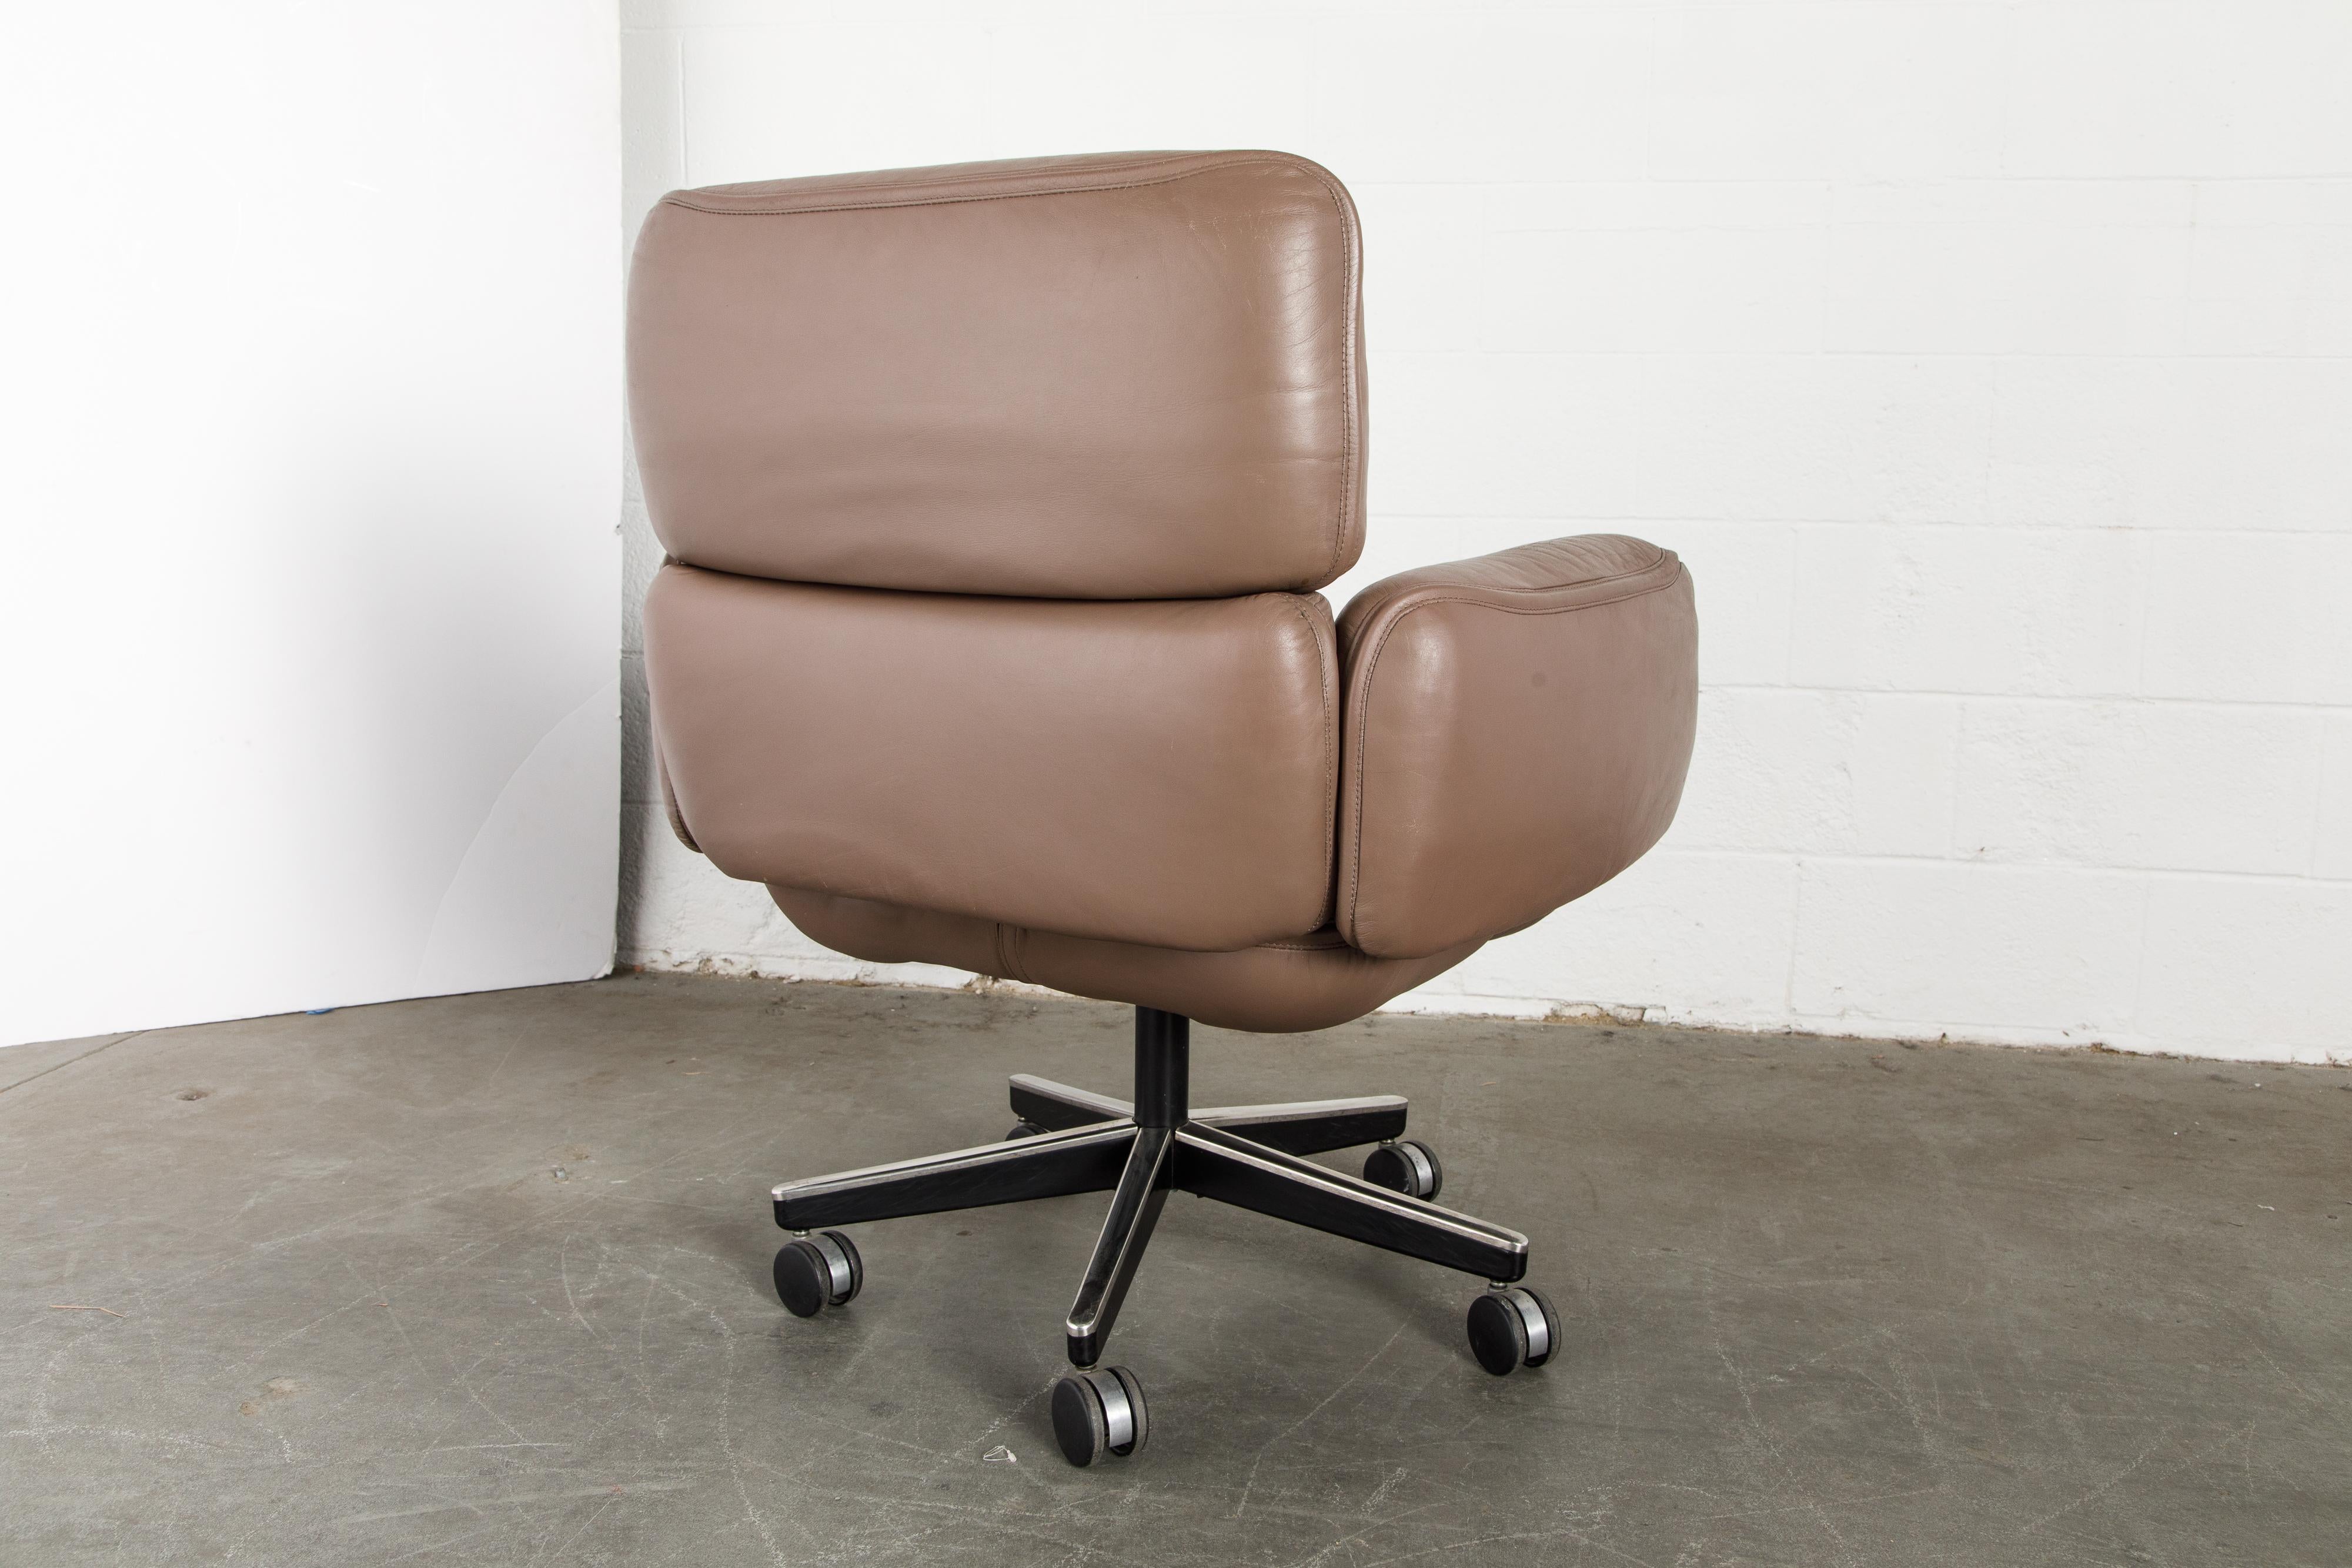 Otto Zapf for Knoll International Leather Desk Chair, c. 1985, Signed  11